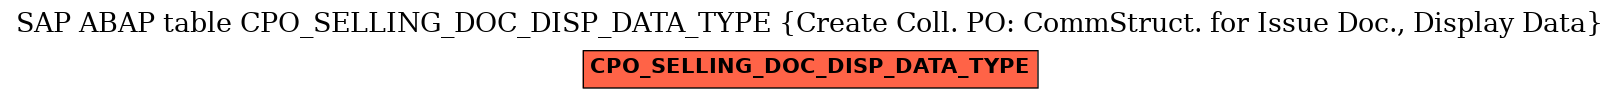 E-R Diagram for table CPO_SELLING_DOC_DISP_DATA_TYPE (Create Coll. PO: CommStruct. for Issue Doc., Display Data)